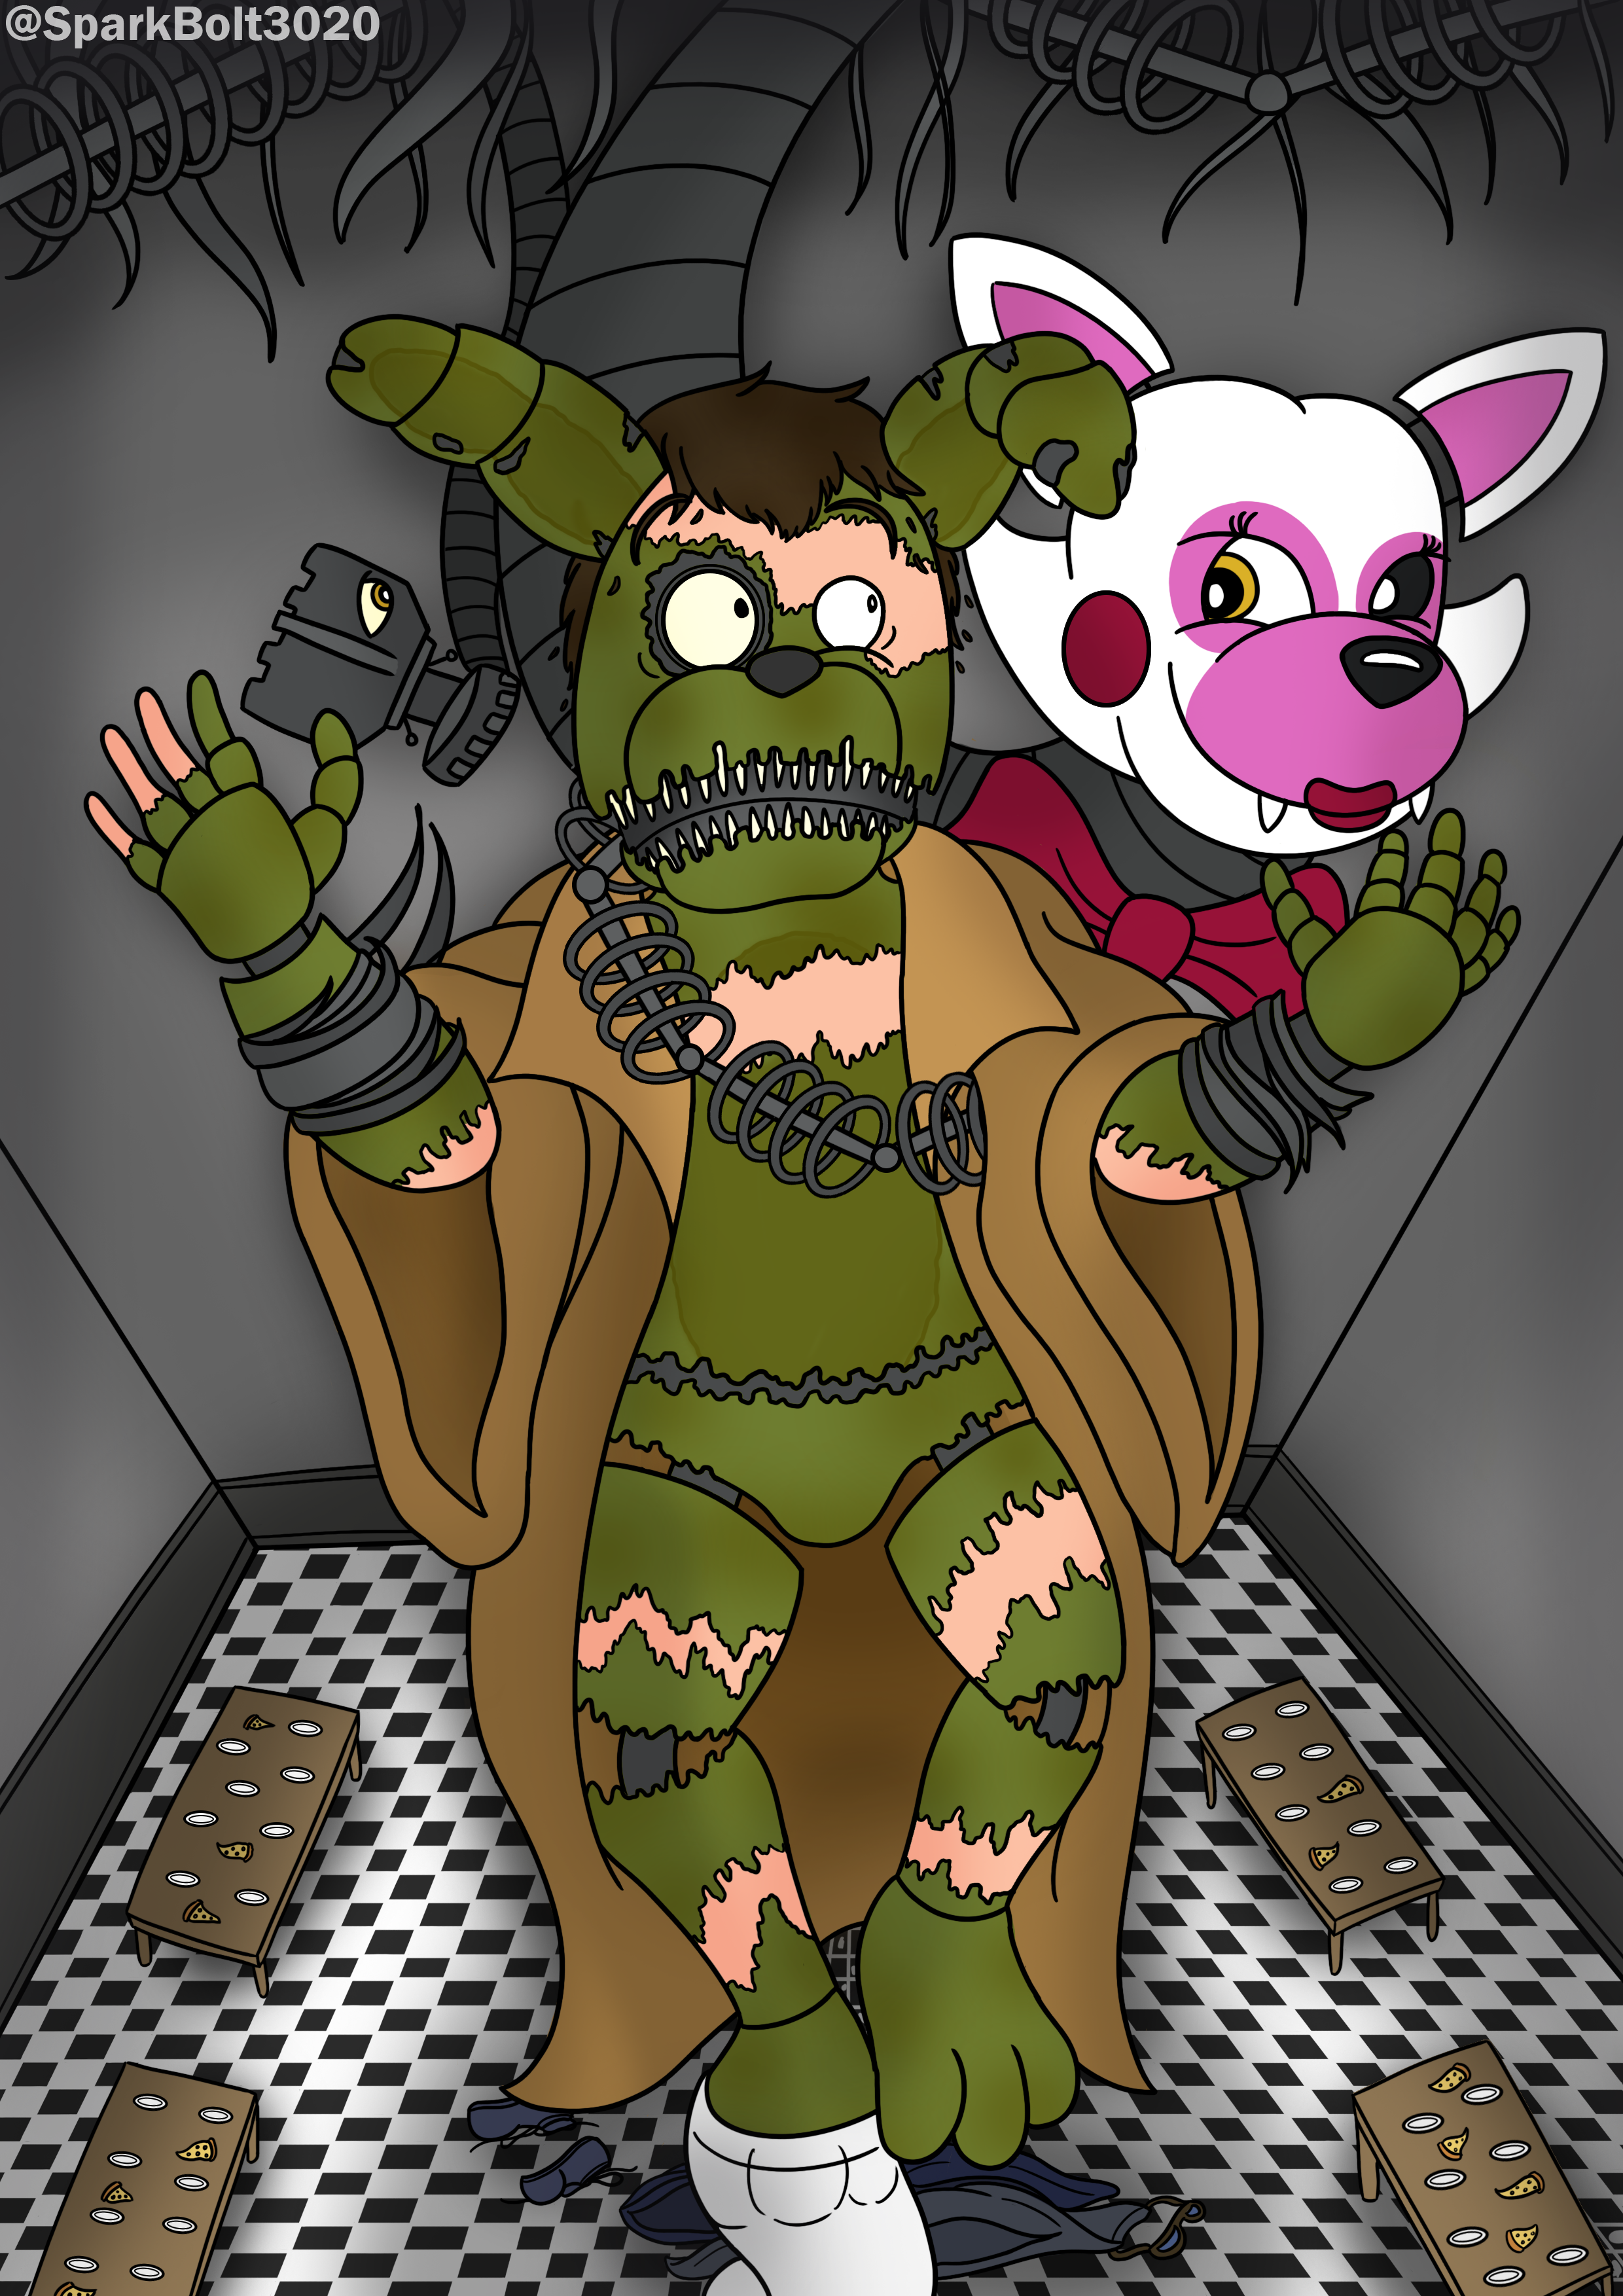 FNAF / FIVE NIGHTS AT FREDDY'S Plushtrap Frost